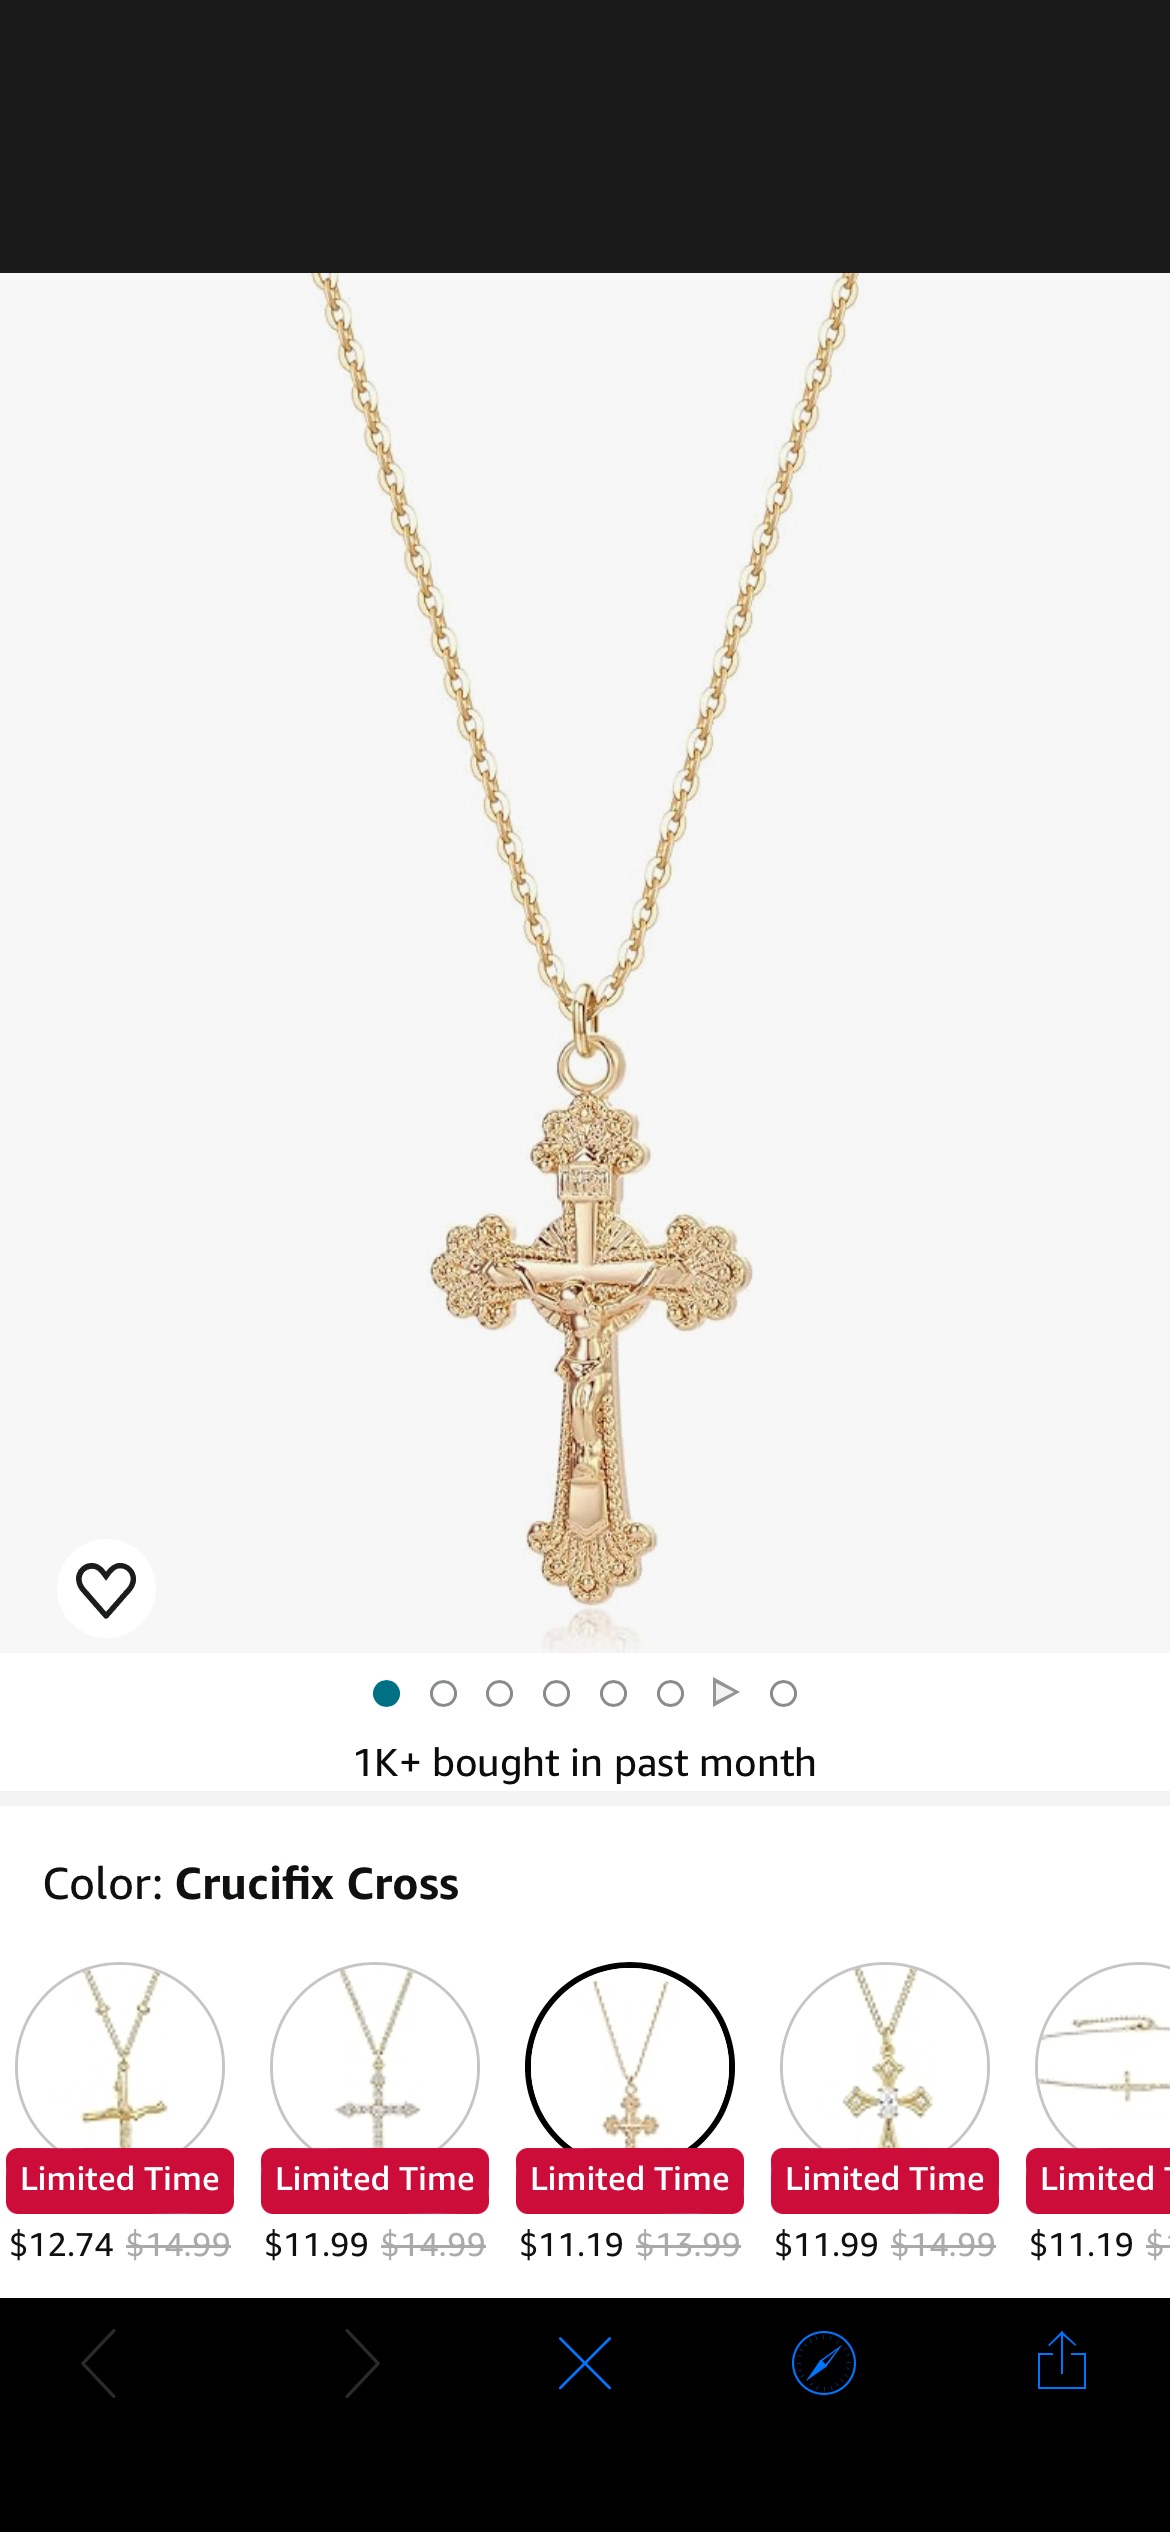 Amazon.com: Fettero Crucifix Necklace Gold Faith Cross Pendant Vintage 14K Gold Plated Dainty Chain Minimalist Simple God Lords Prayer Religious Jewelry Gift : Clothing, Shoes & Jewelry